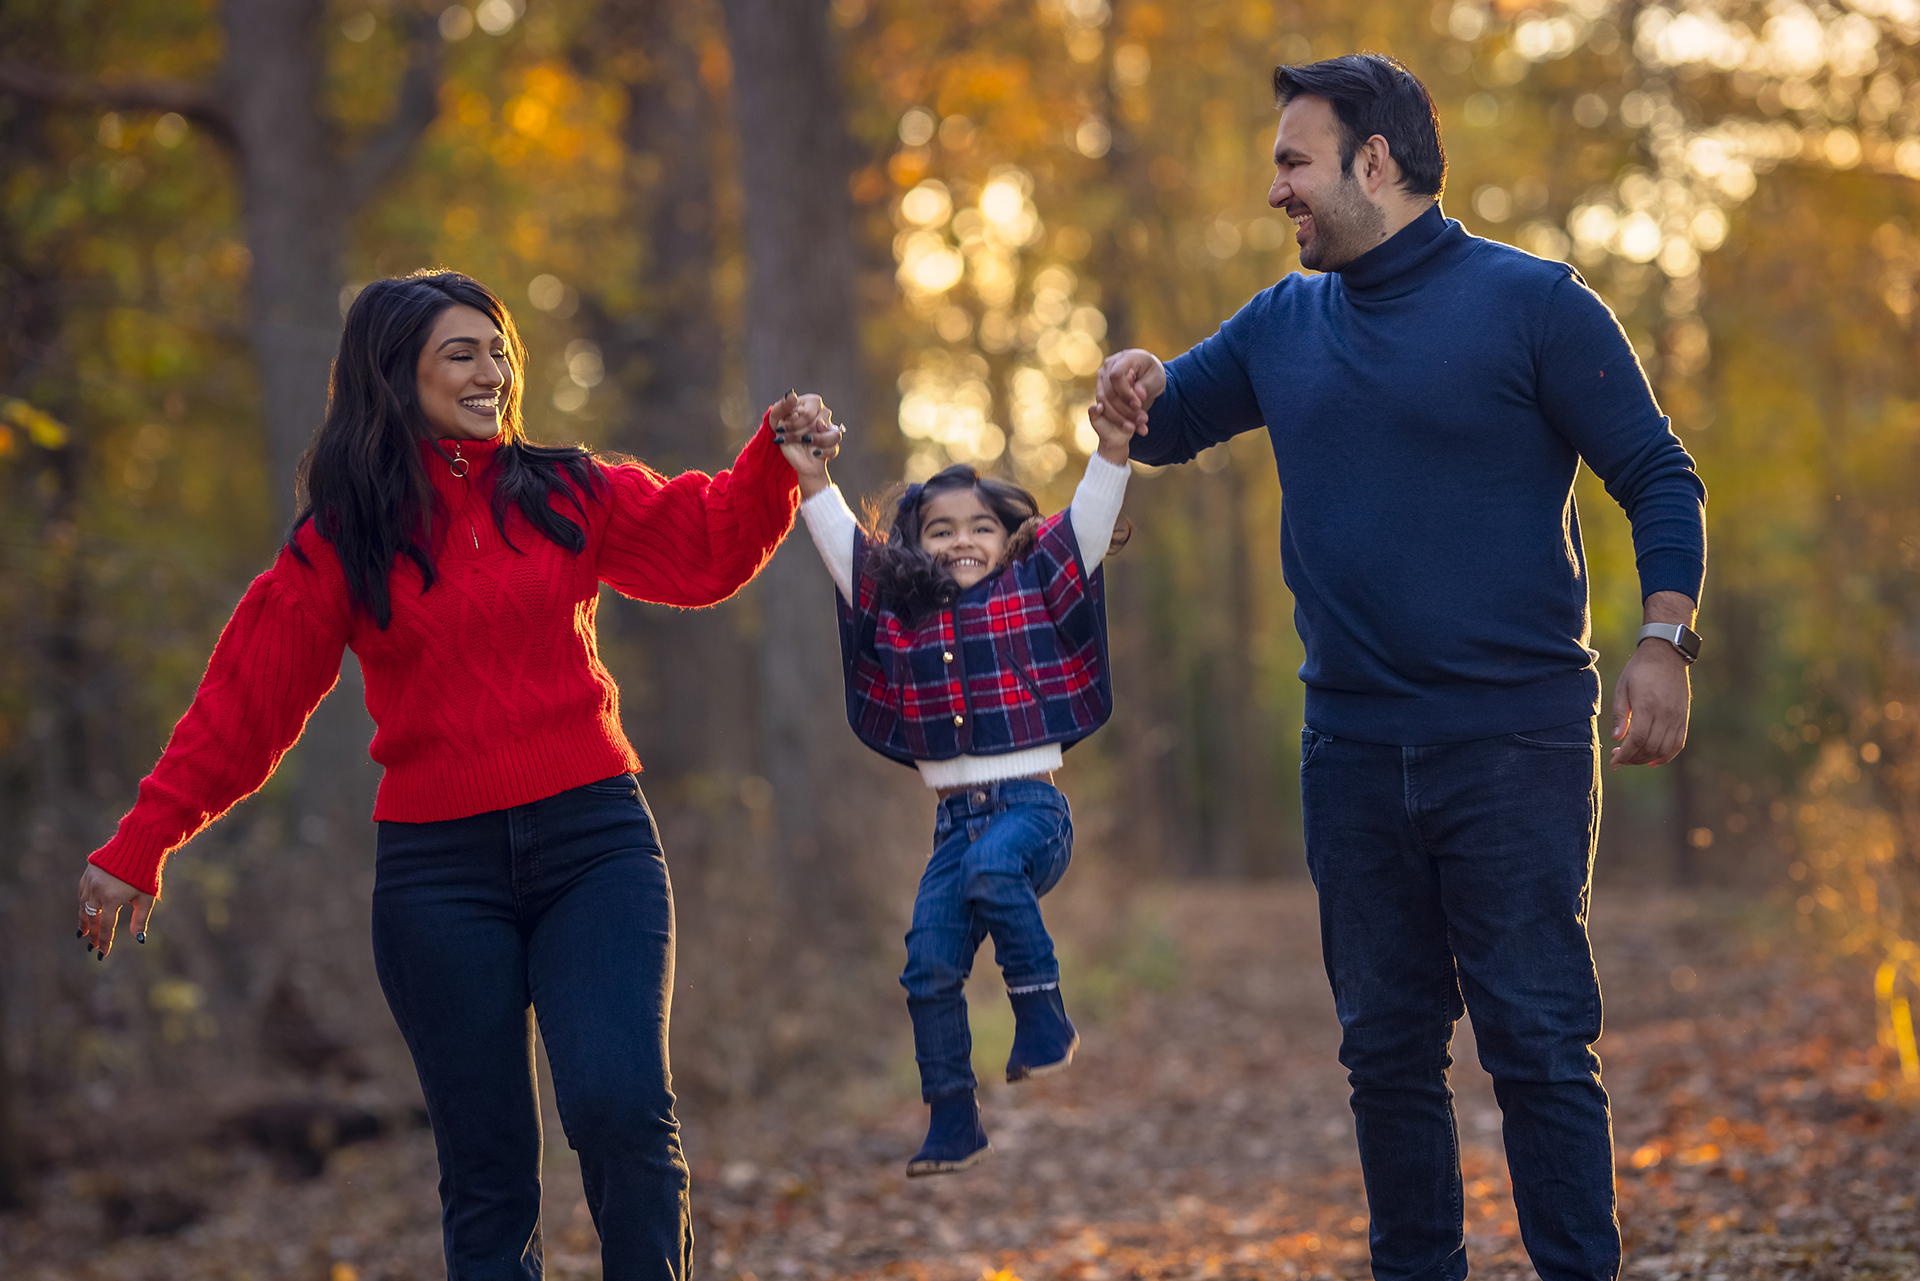 Local Detroit family photographer captures family portrait of a couple walking through the forest with their child, holding hands.